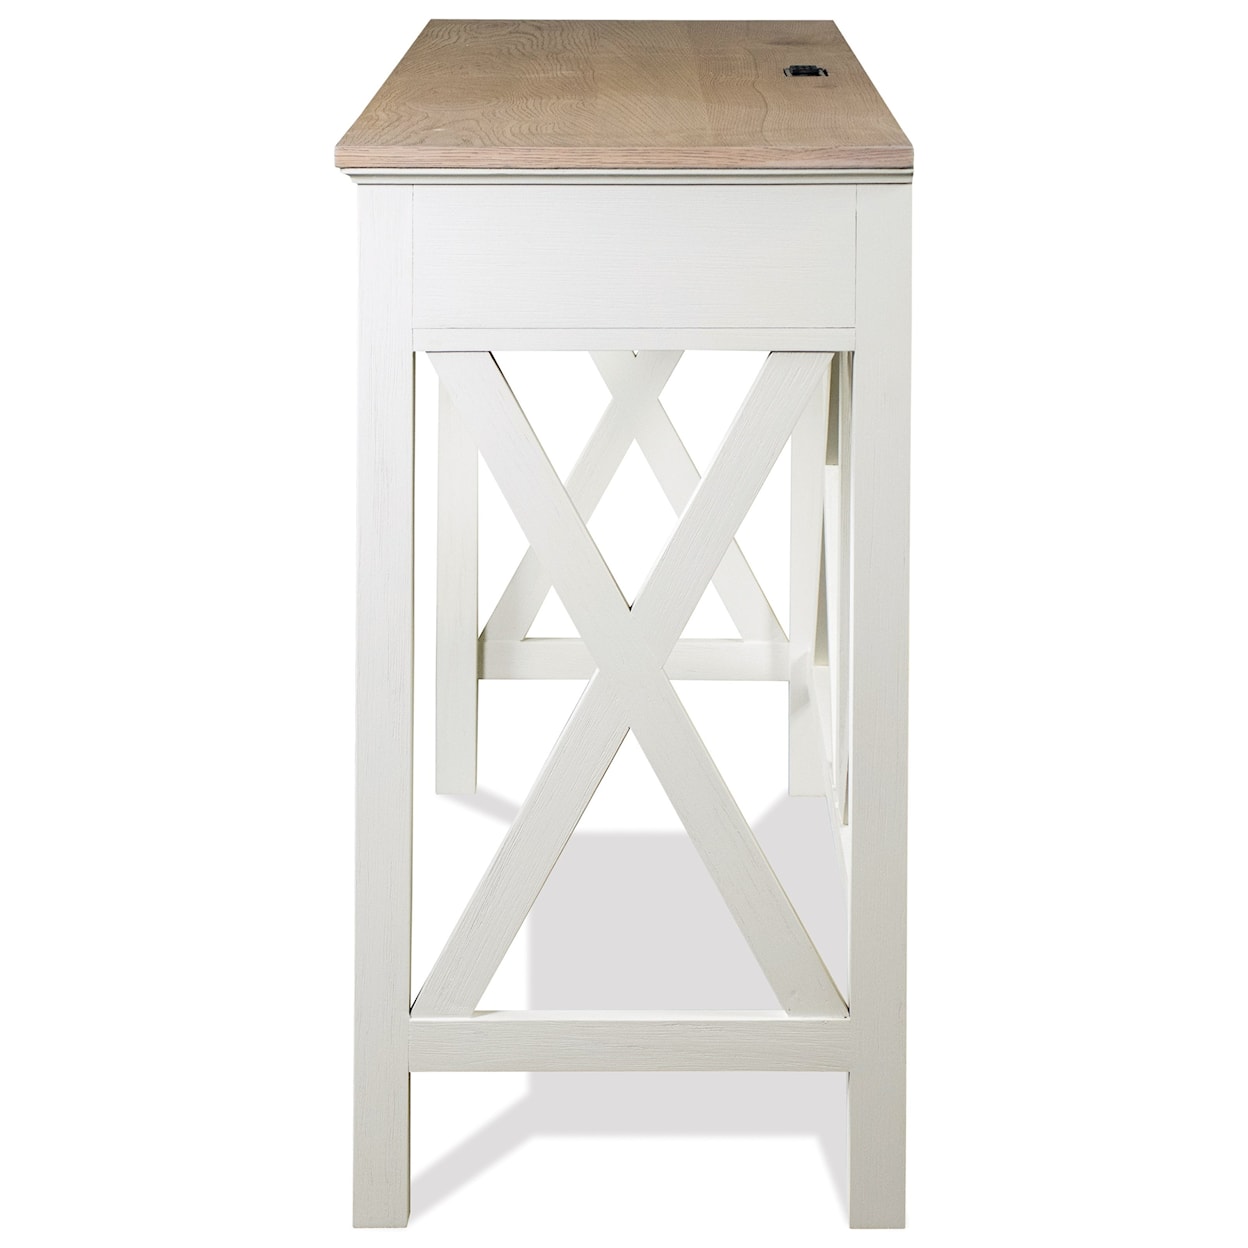 Riverside Furniture Osborne Console Table with Stools